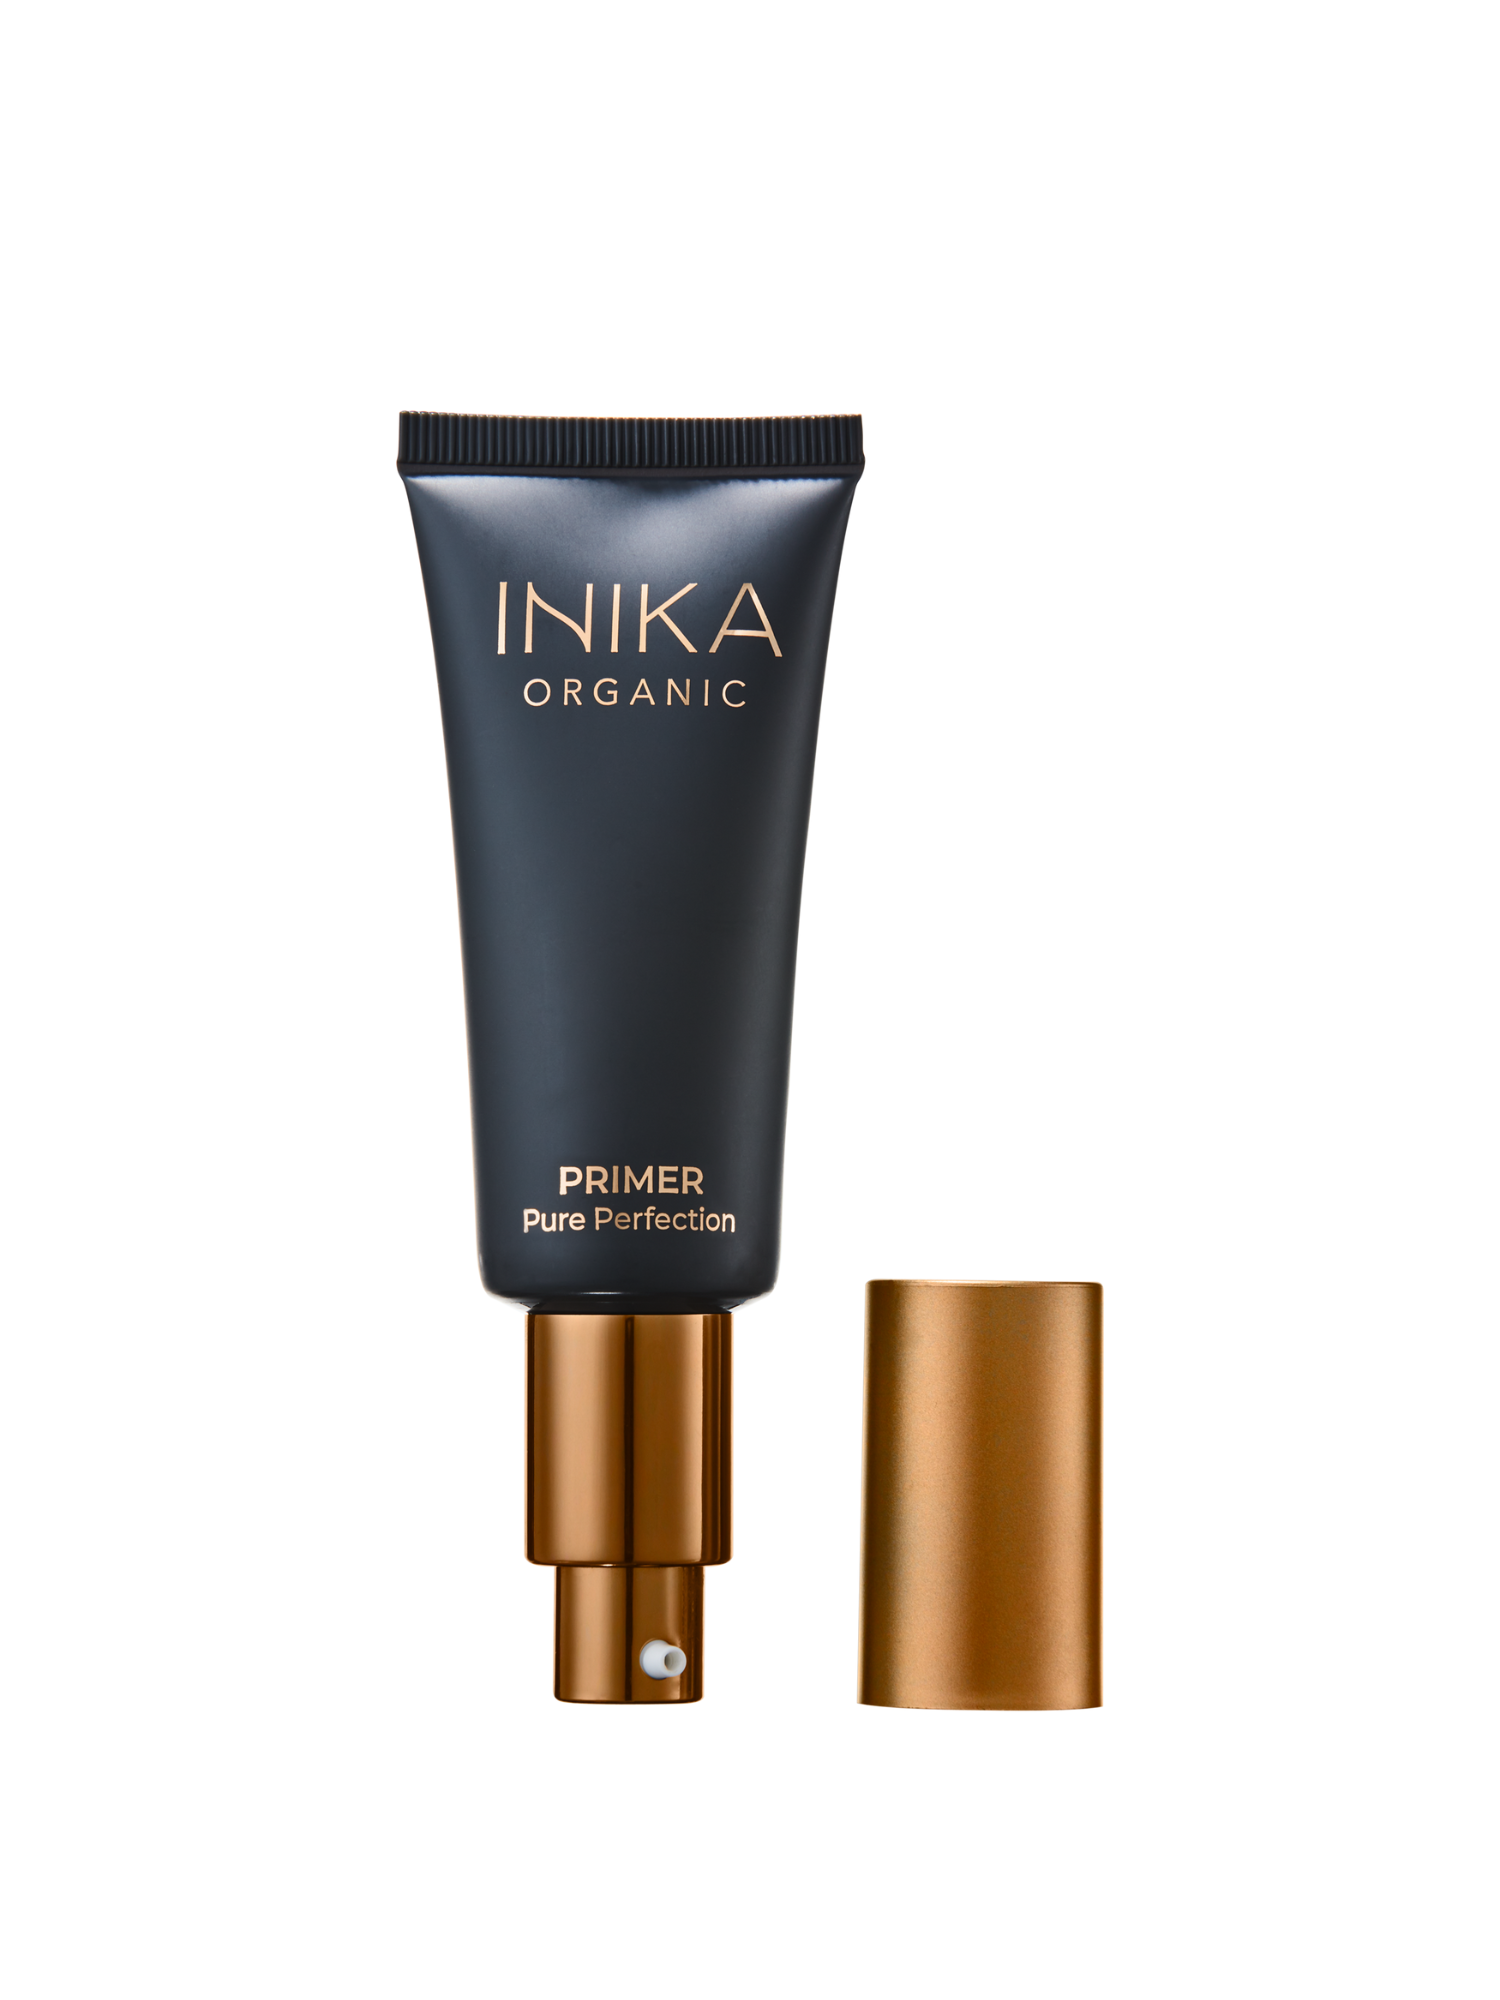 INIKA Organic, Pure Perfection Primer, naturally derived, cruelty free, certified vegan, Australian owned, Natural, Nourished, non-toxic, Nourished Nederland